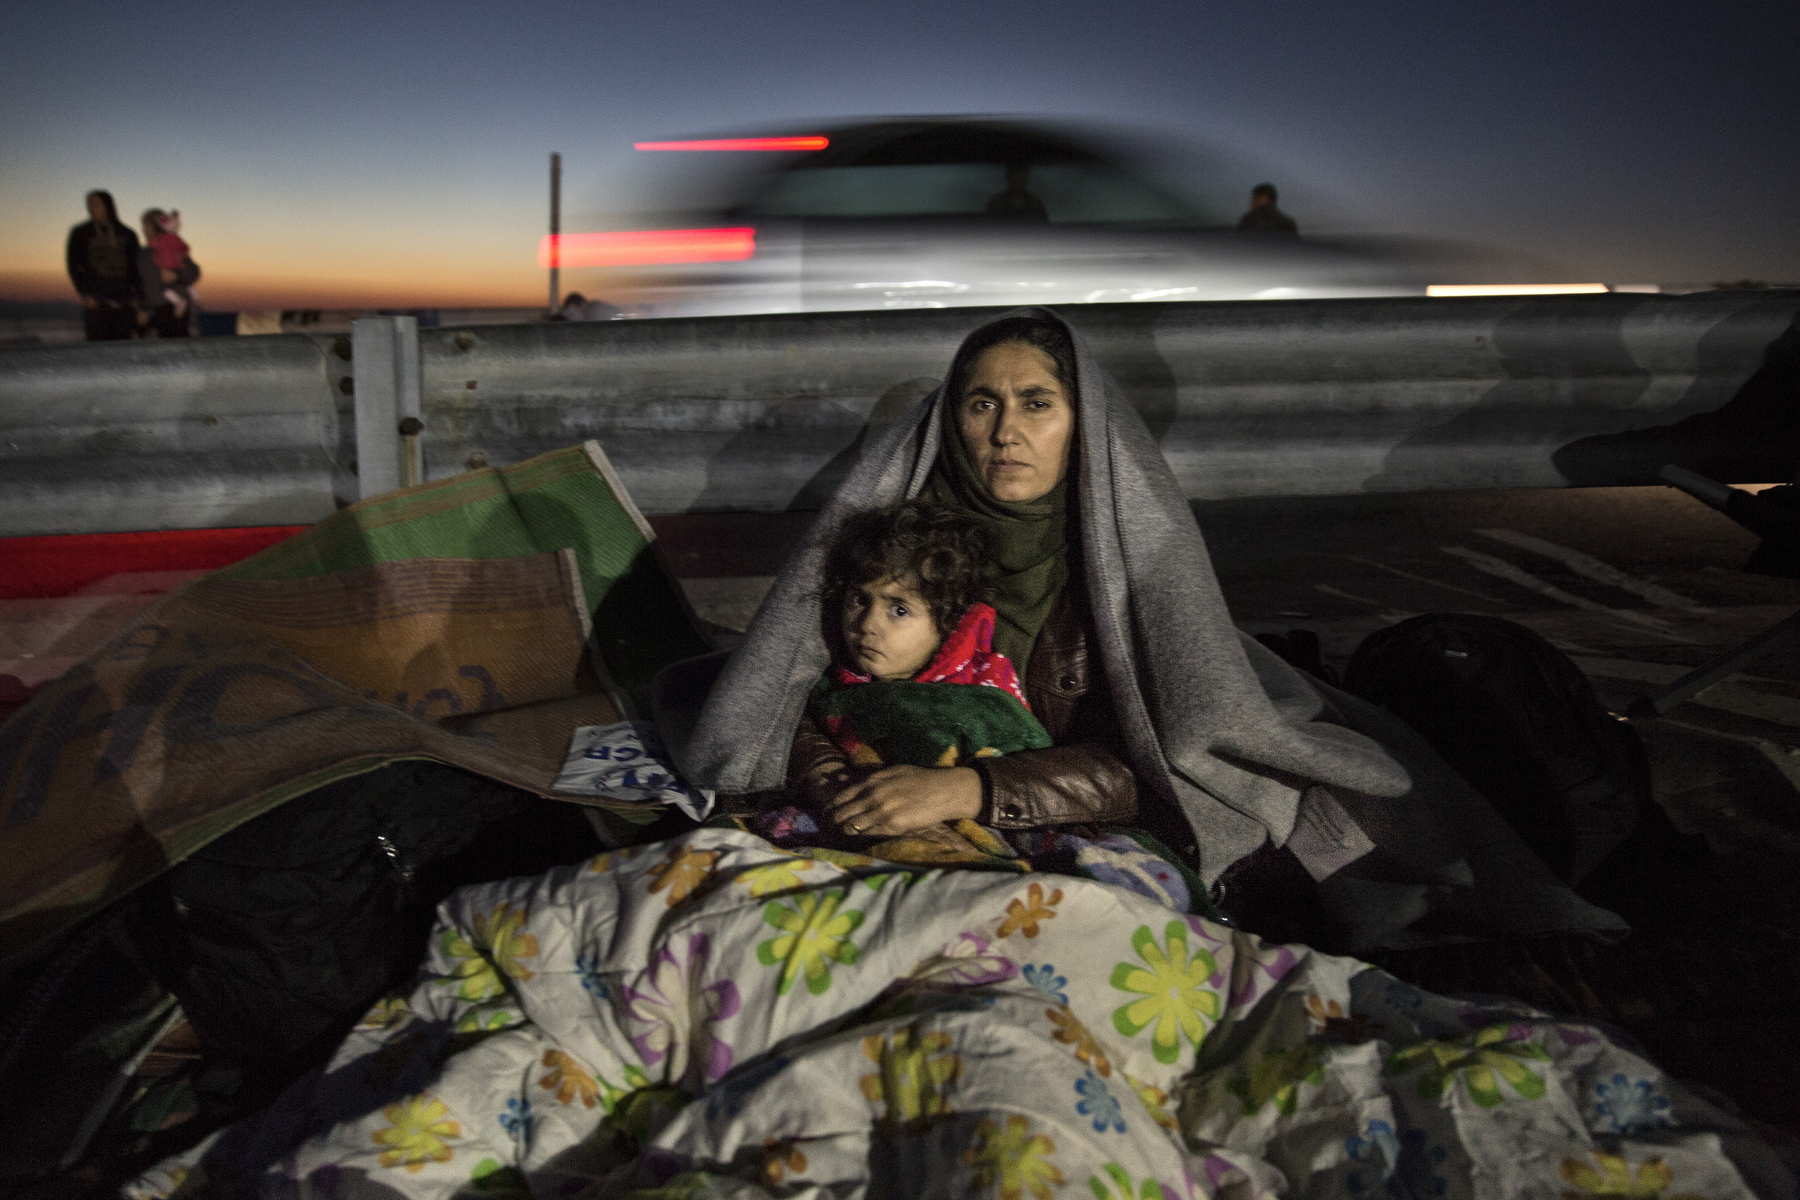 LESBOS, GREECE - NOVEMBER 4: An Iraqi mother sits with her daughter at the Oxy transitional camp for another night sleeping in the cold. Colder weather and rough seas continue to cause deaths at sea as thousands travel in overcrowded small rafts. According to the IOM, an estimated 100,000 people landed in Greece, an average of almost 4,500 per day in late October and November. Nearly all of those entering Greece on a boat from Turkey are from the war zones of Syria, Iraq and Afghanistan. (Photo by Paula Bronstein)